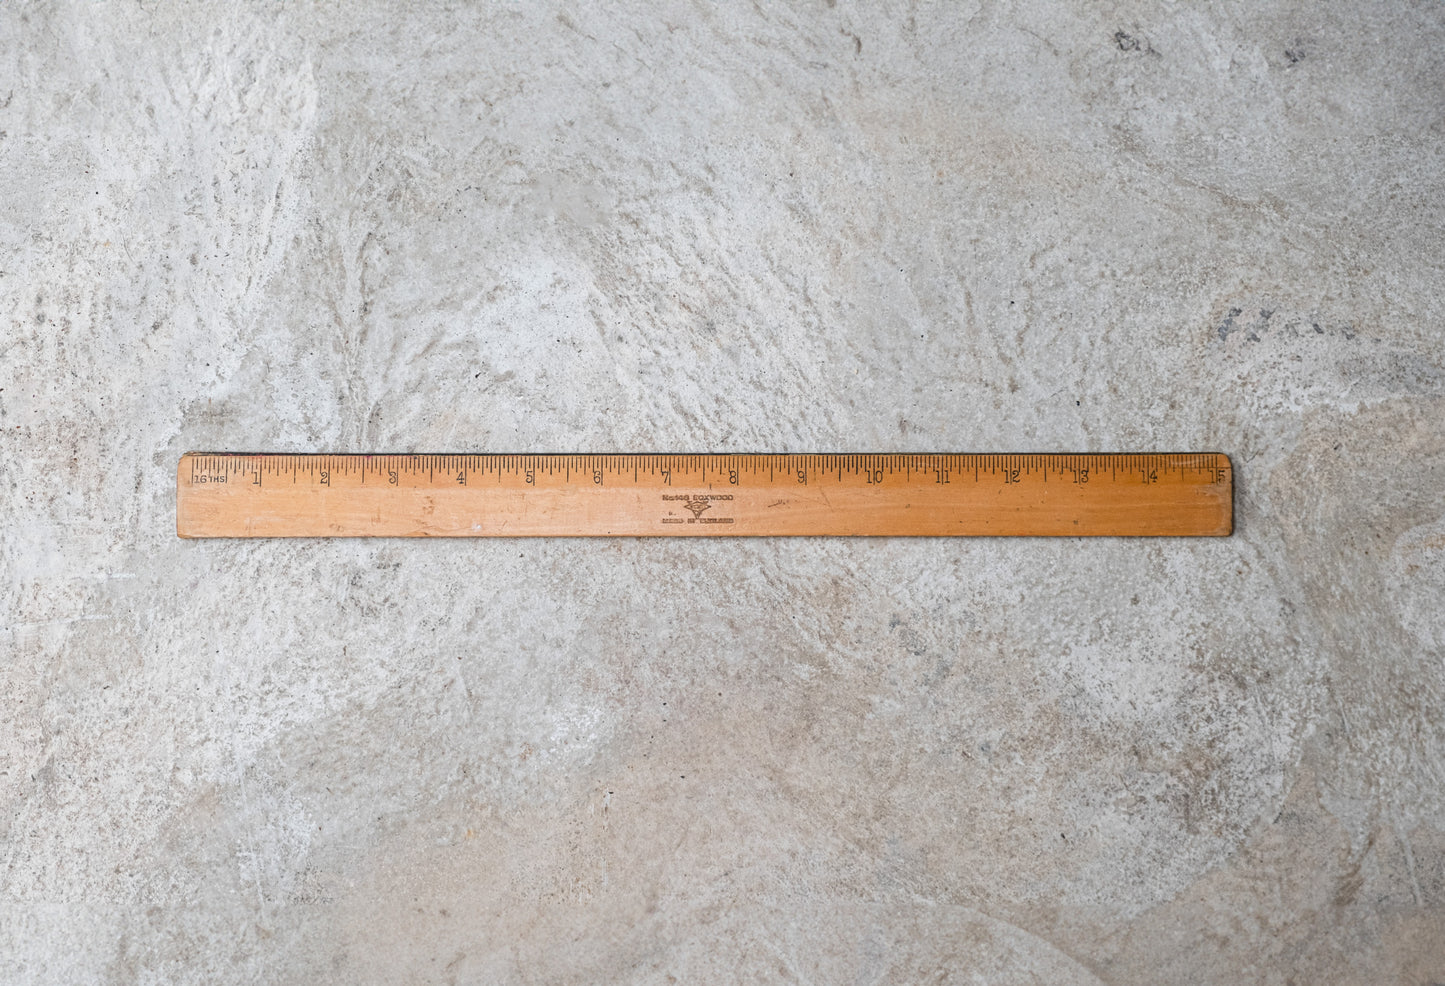 Long Wooden Rulers in Inches